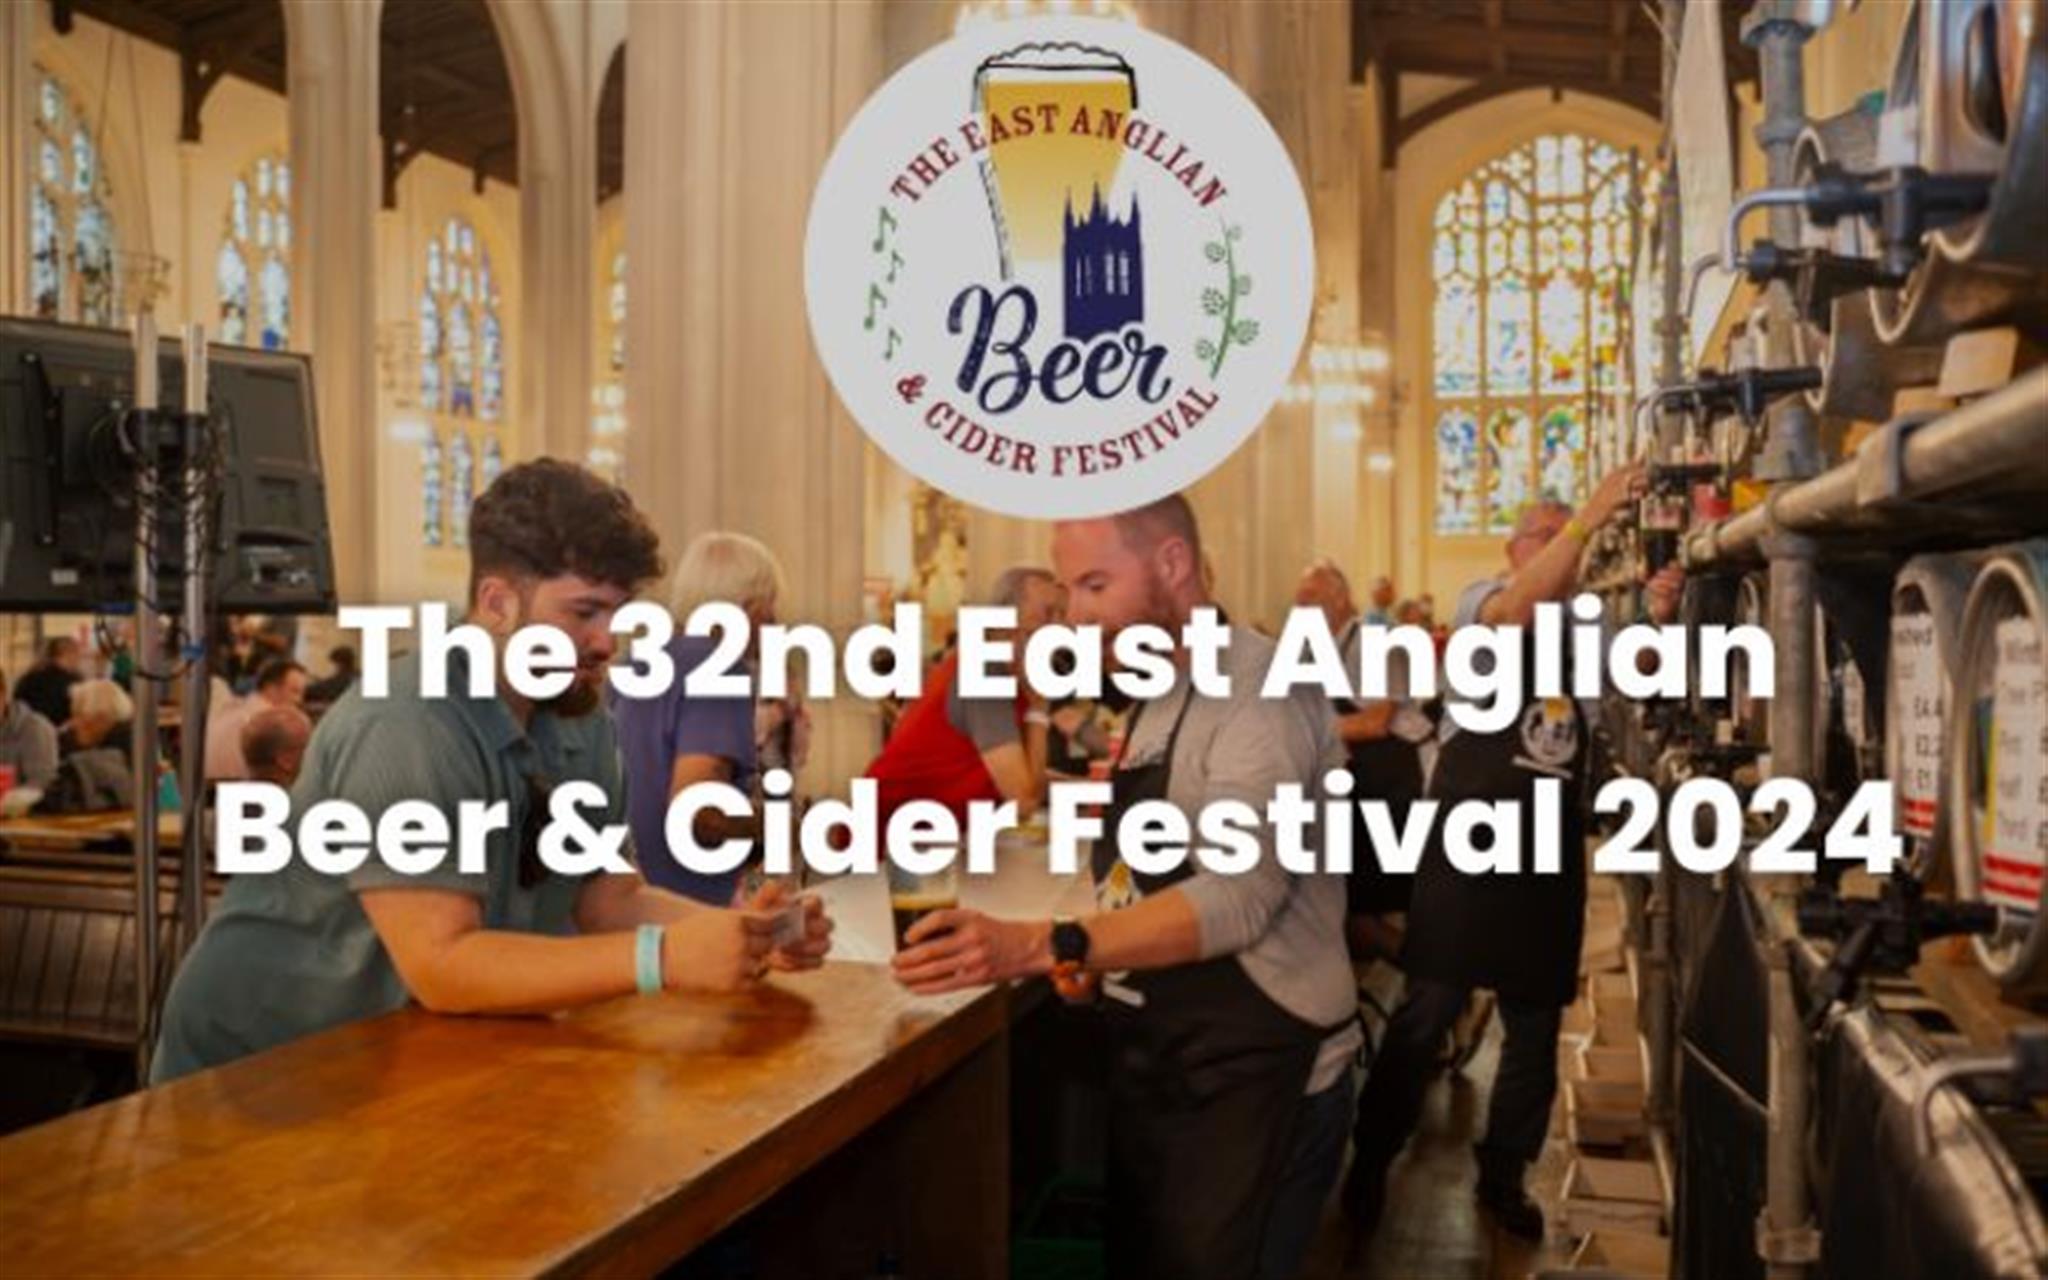 The 32nd East Anglian Beer & Cider Festival 2024 image